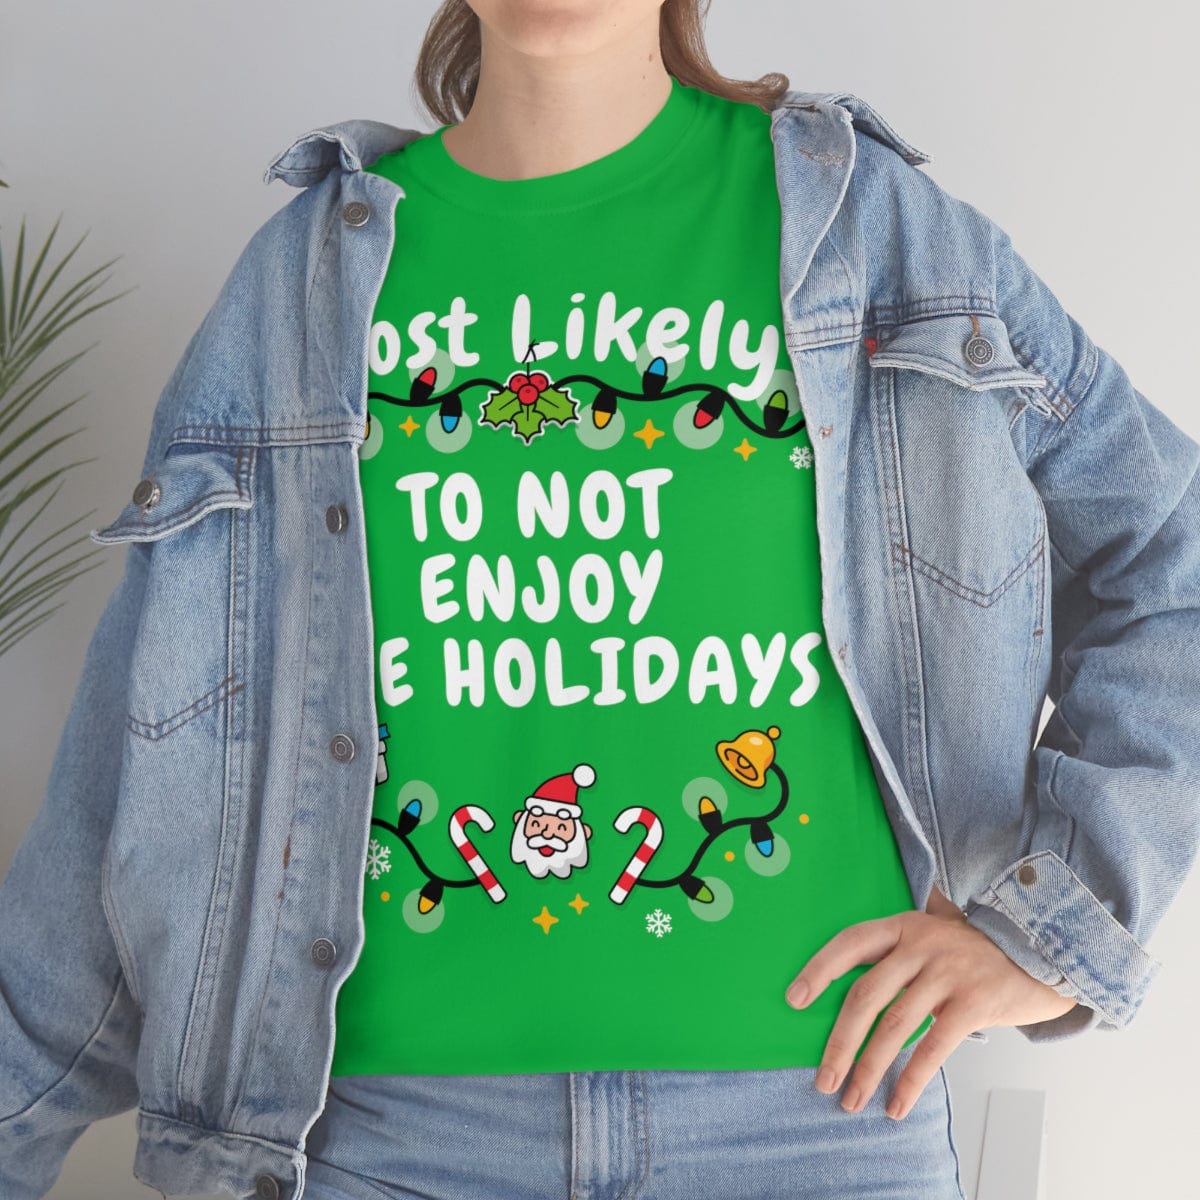 TO NOT ENJOY THE HOLIDAYS